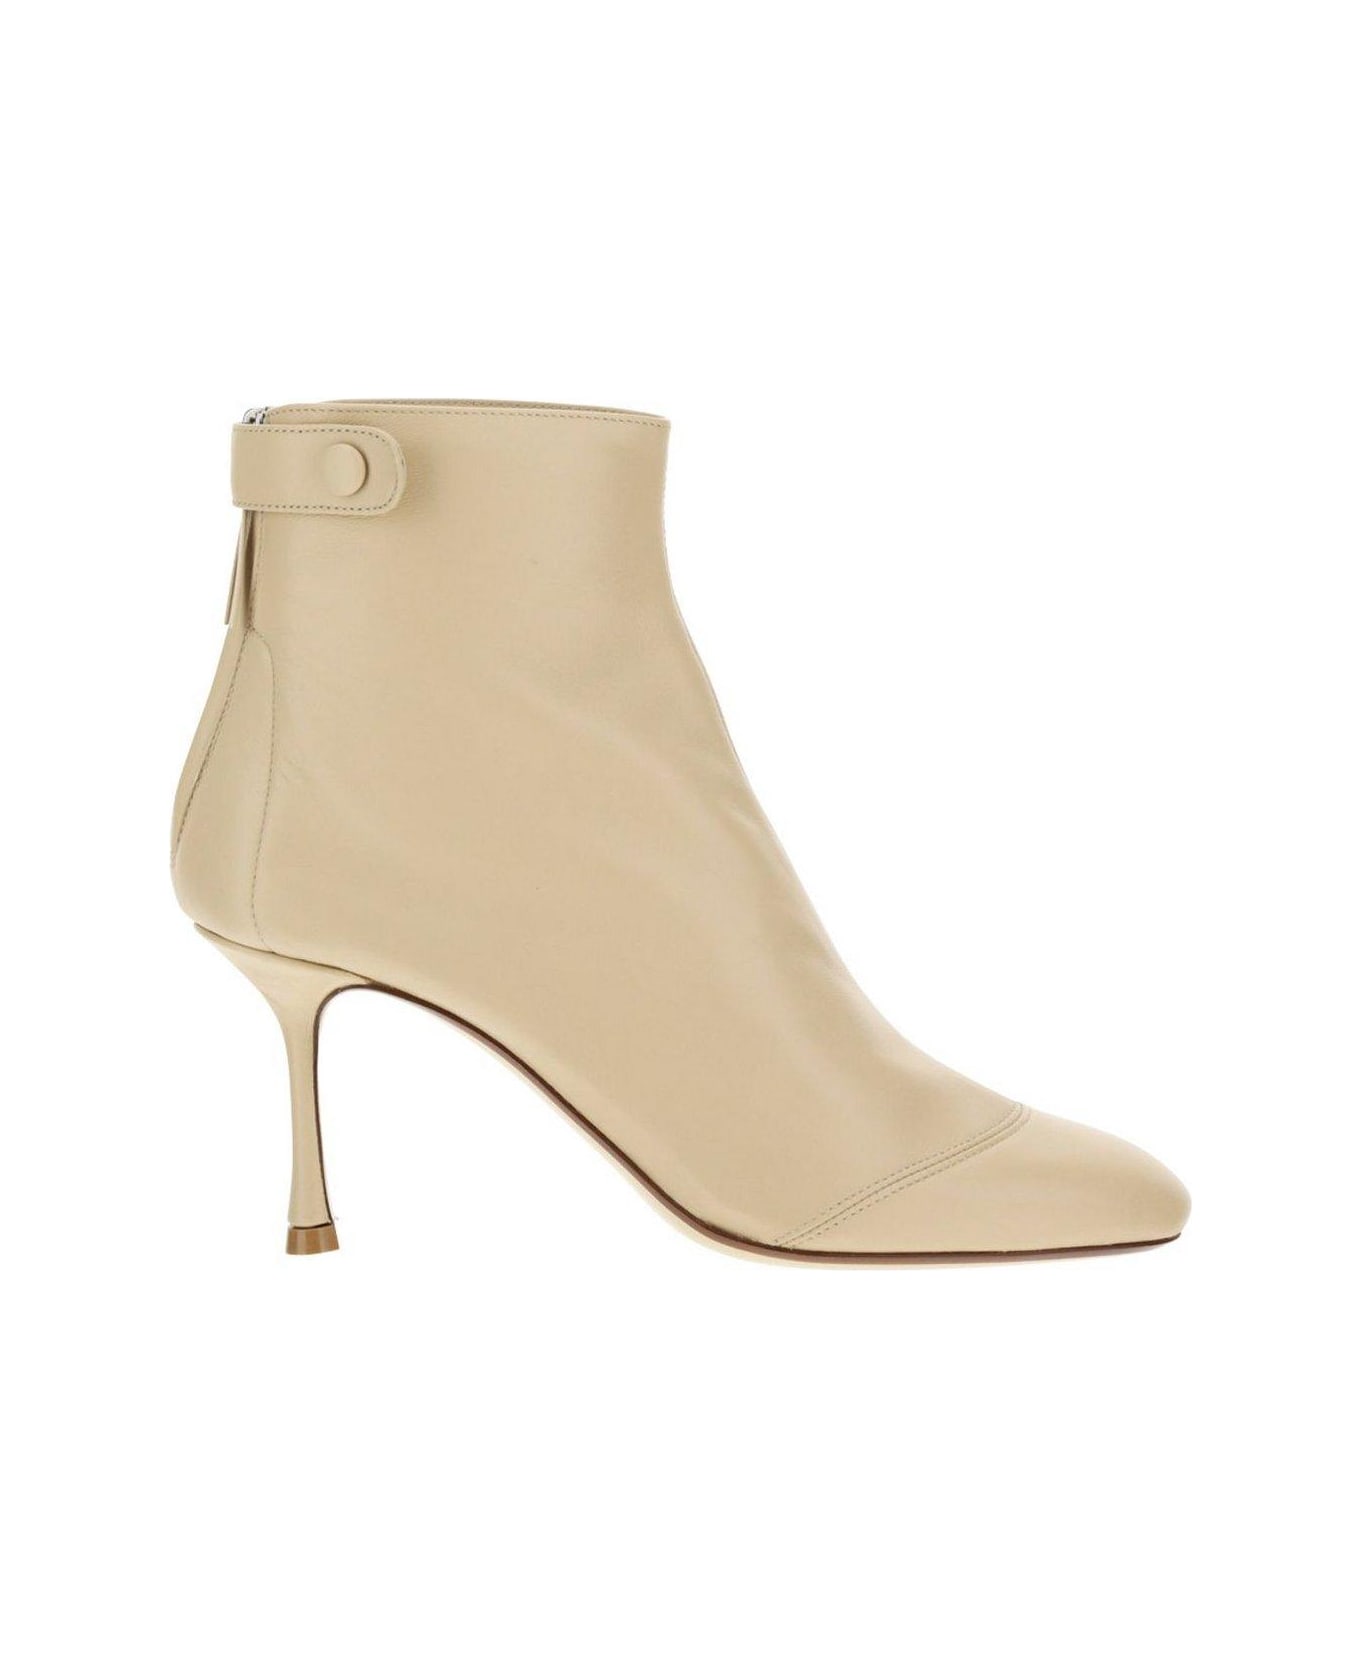 Francesco Russo Round-toe Ankle-length Boots - Grey